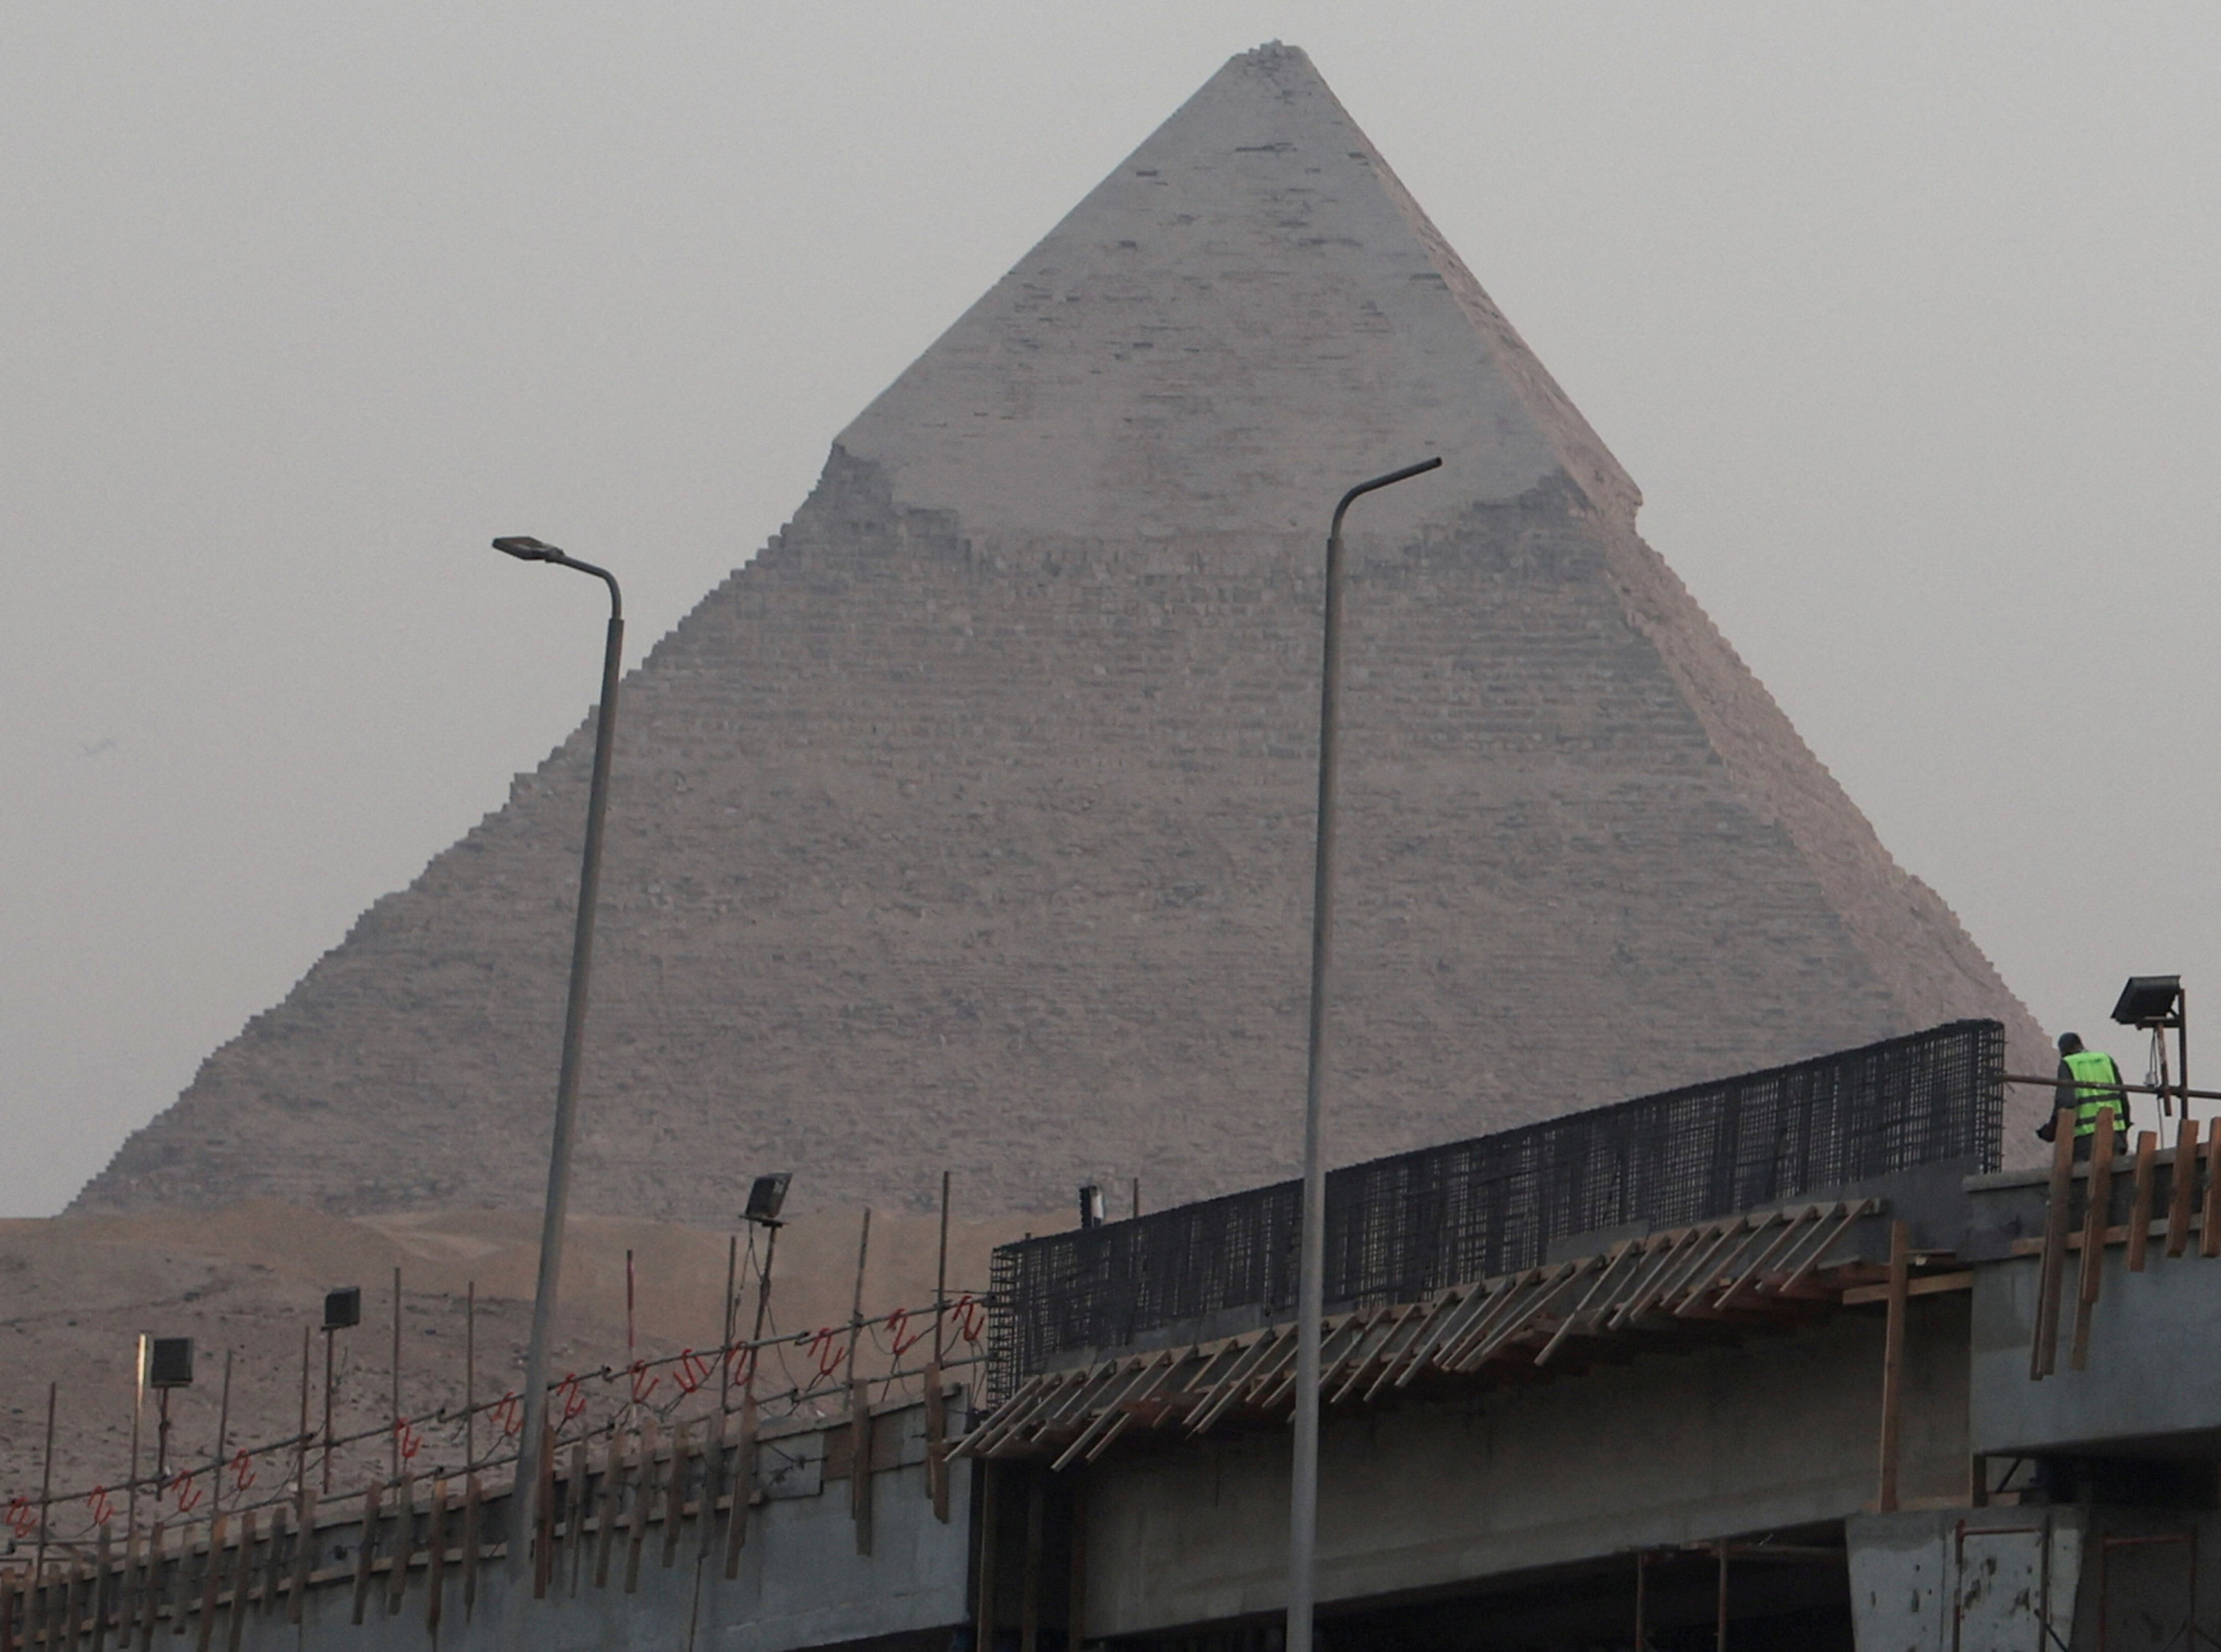 New tourist walkway bridge project to connect the Grand Egyptian Museum and the archaeological area of the Sphinx and the Great Pyramids in Giza